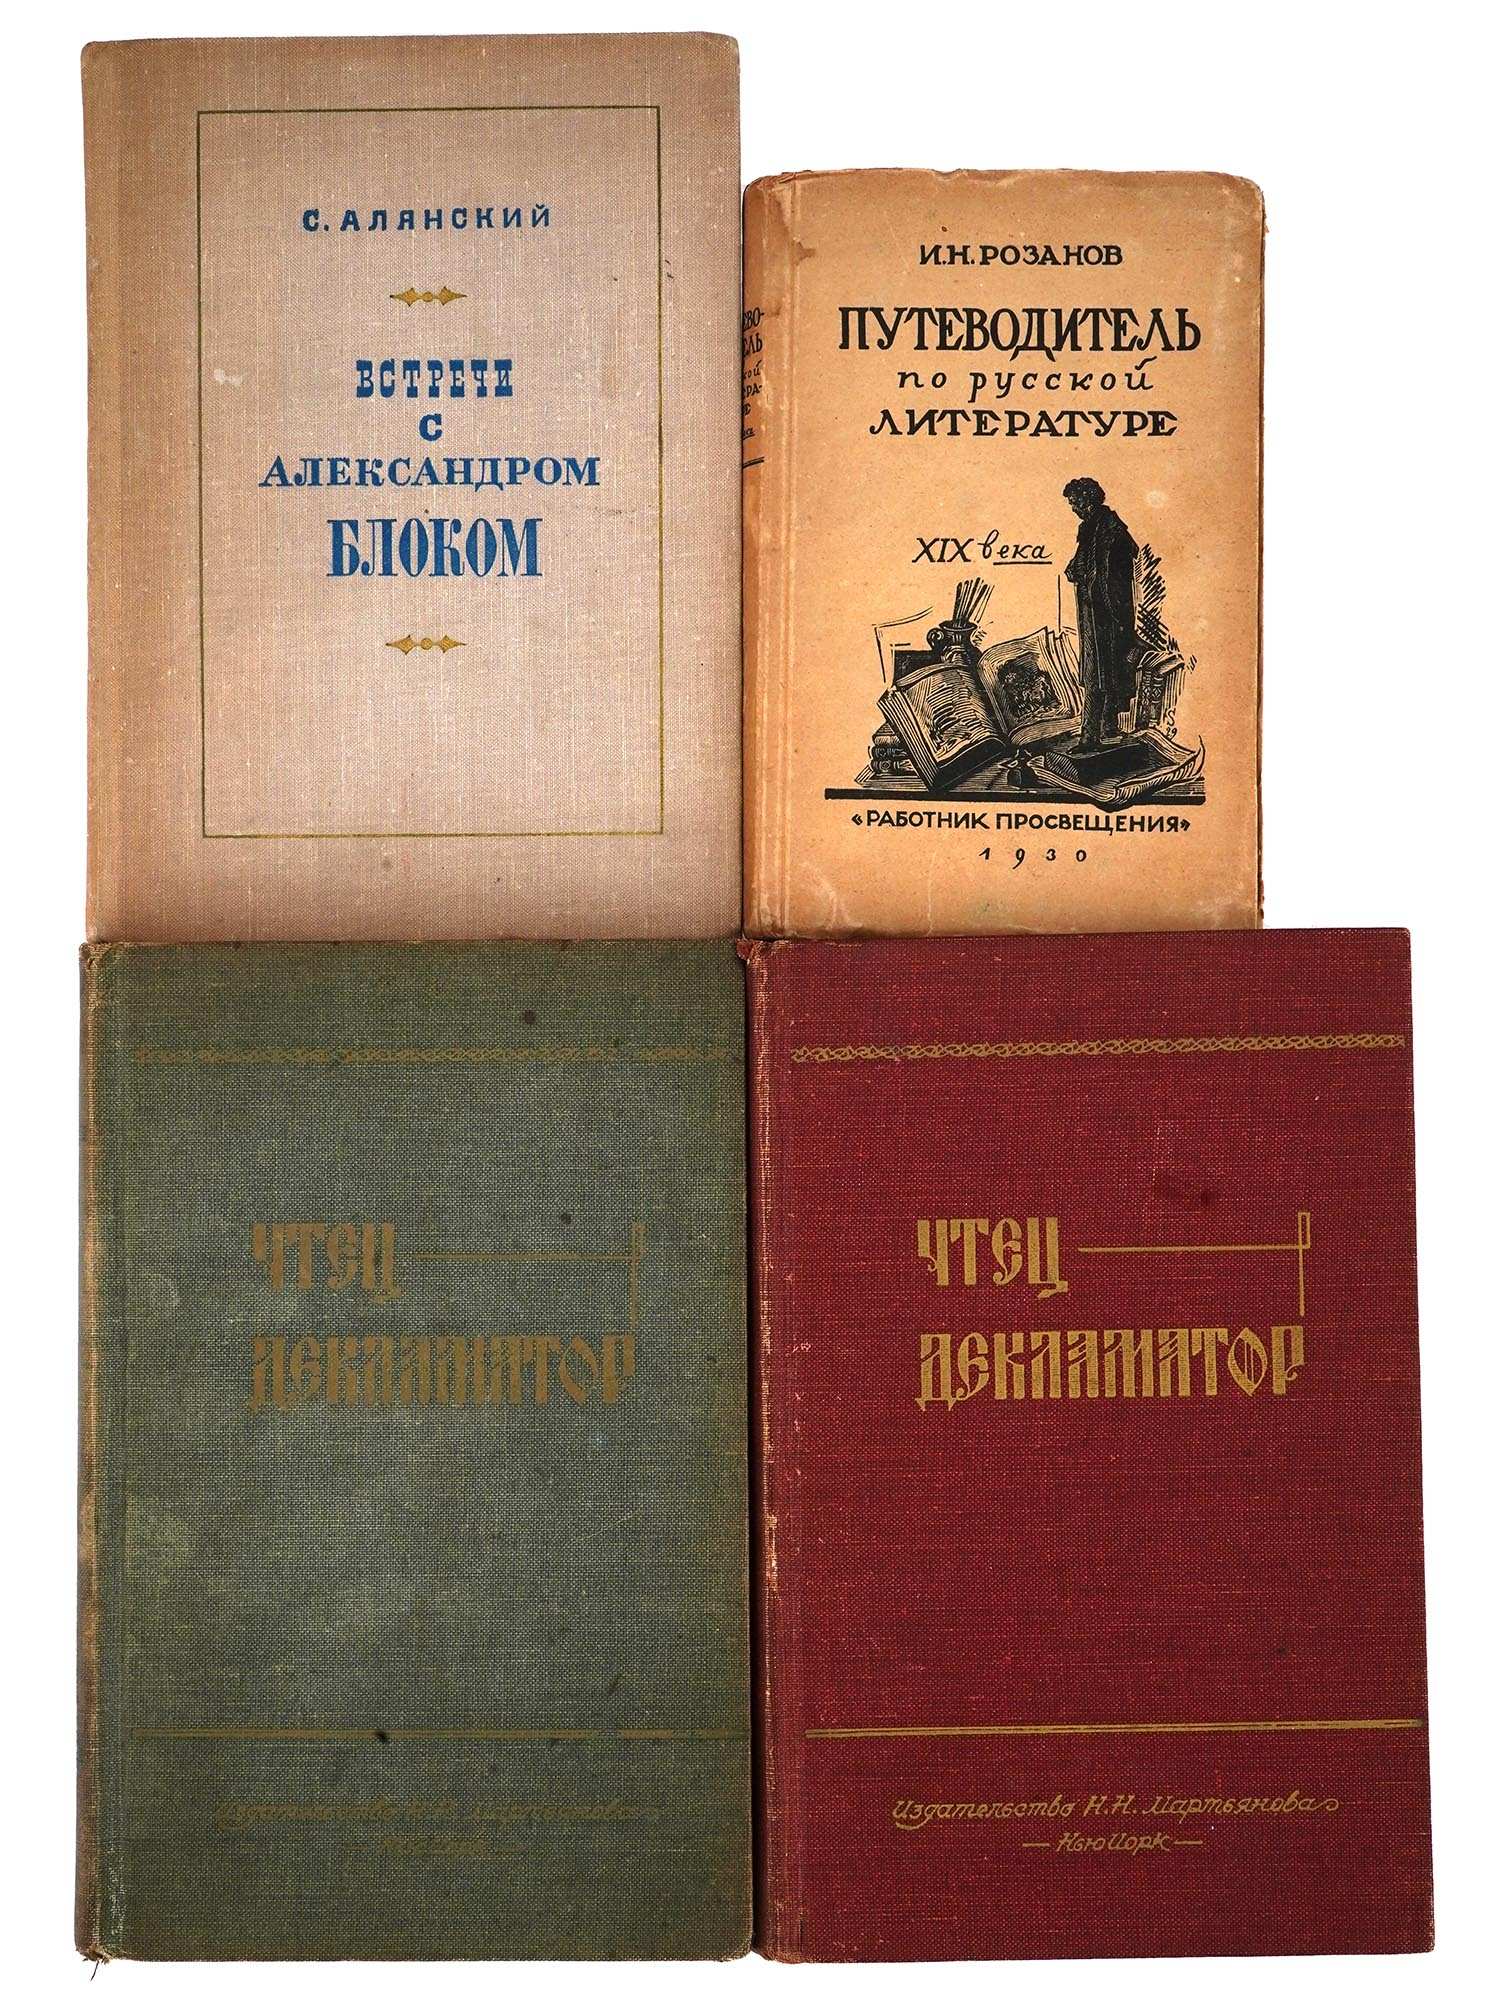 VINTAGE RUSSIAN ILLUSTRATED BOOKS PIC-0